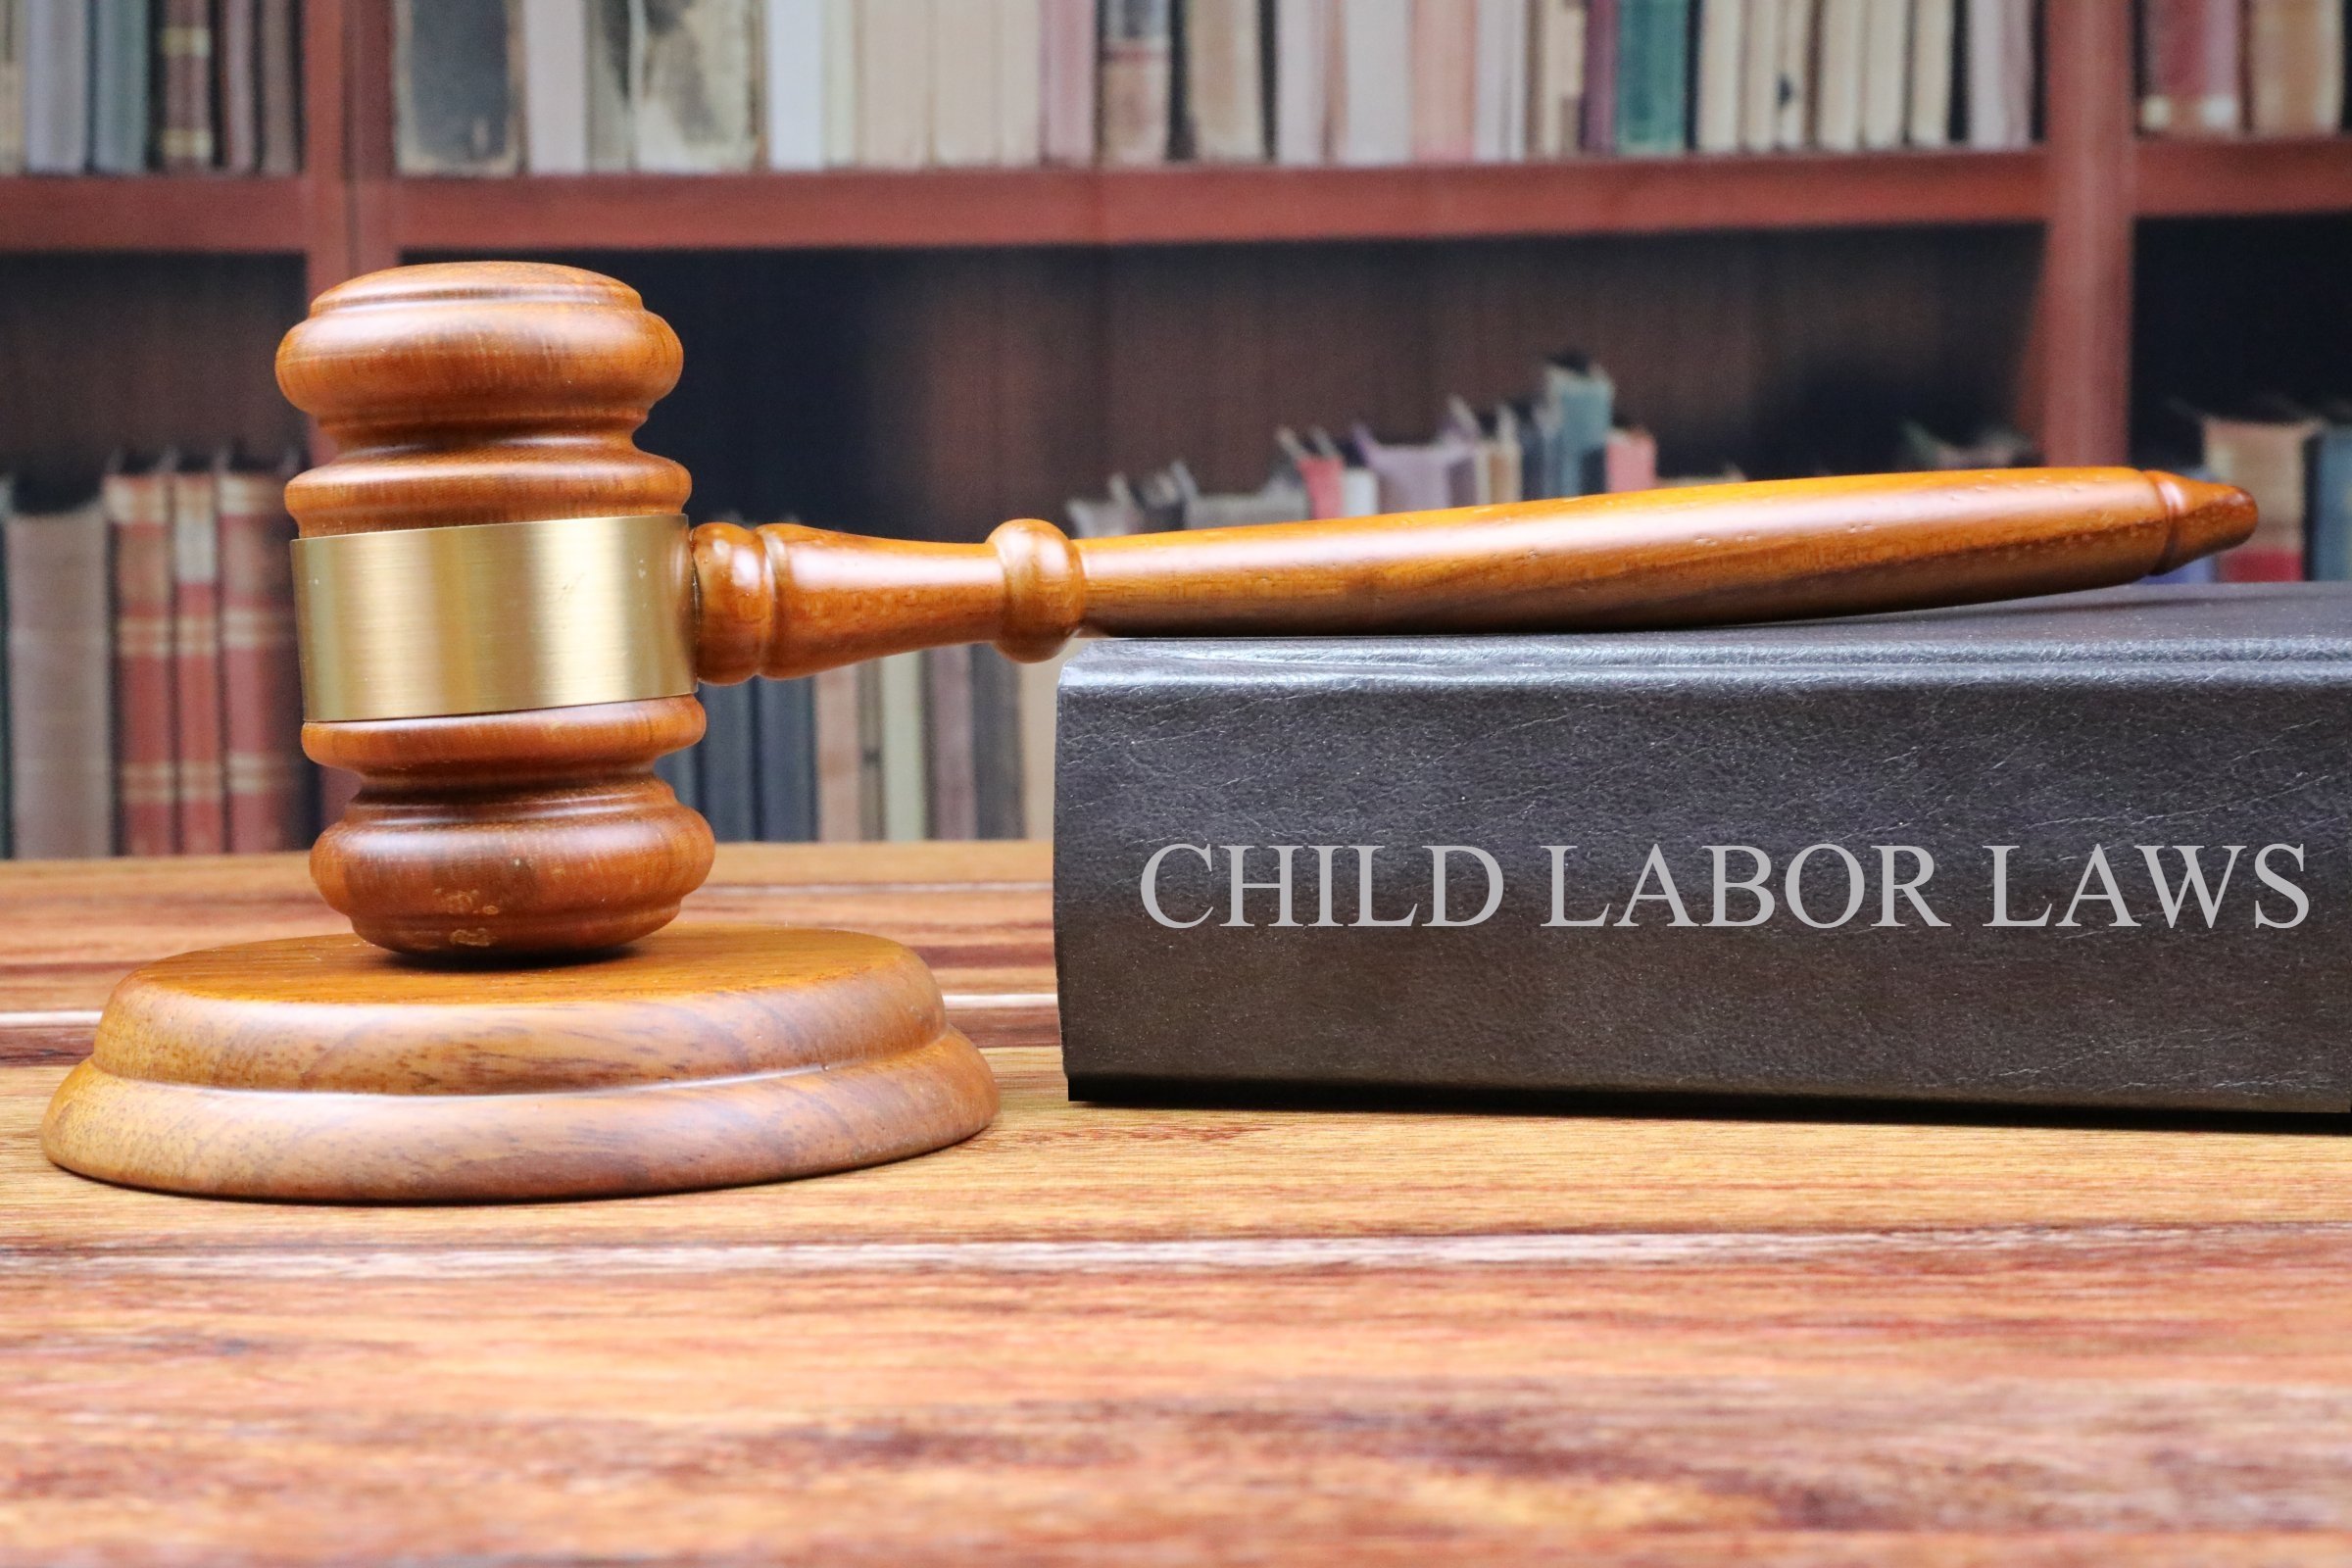 Child Labor Laws Free of Charge Creative Commons Legal 9 image